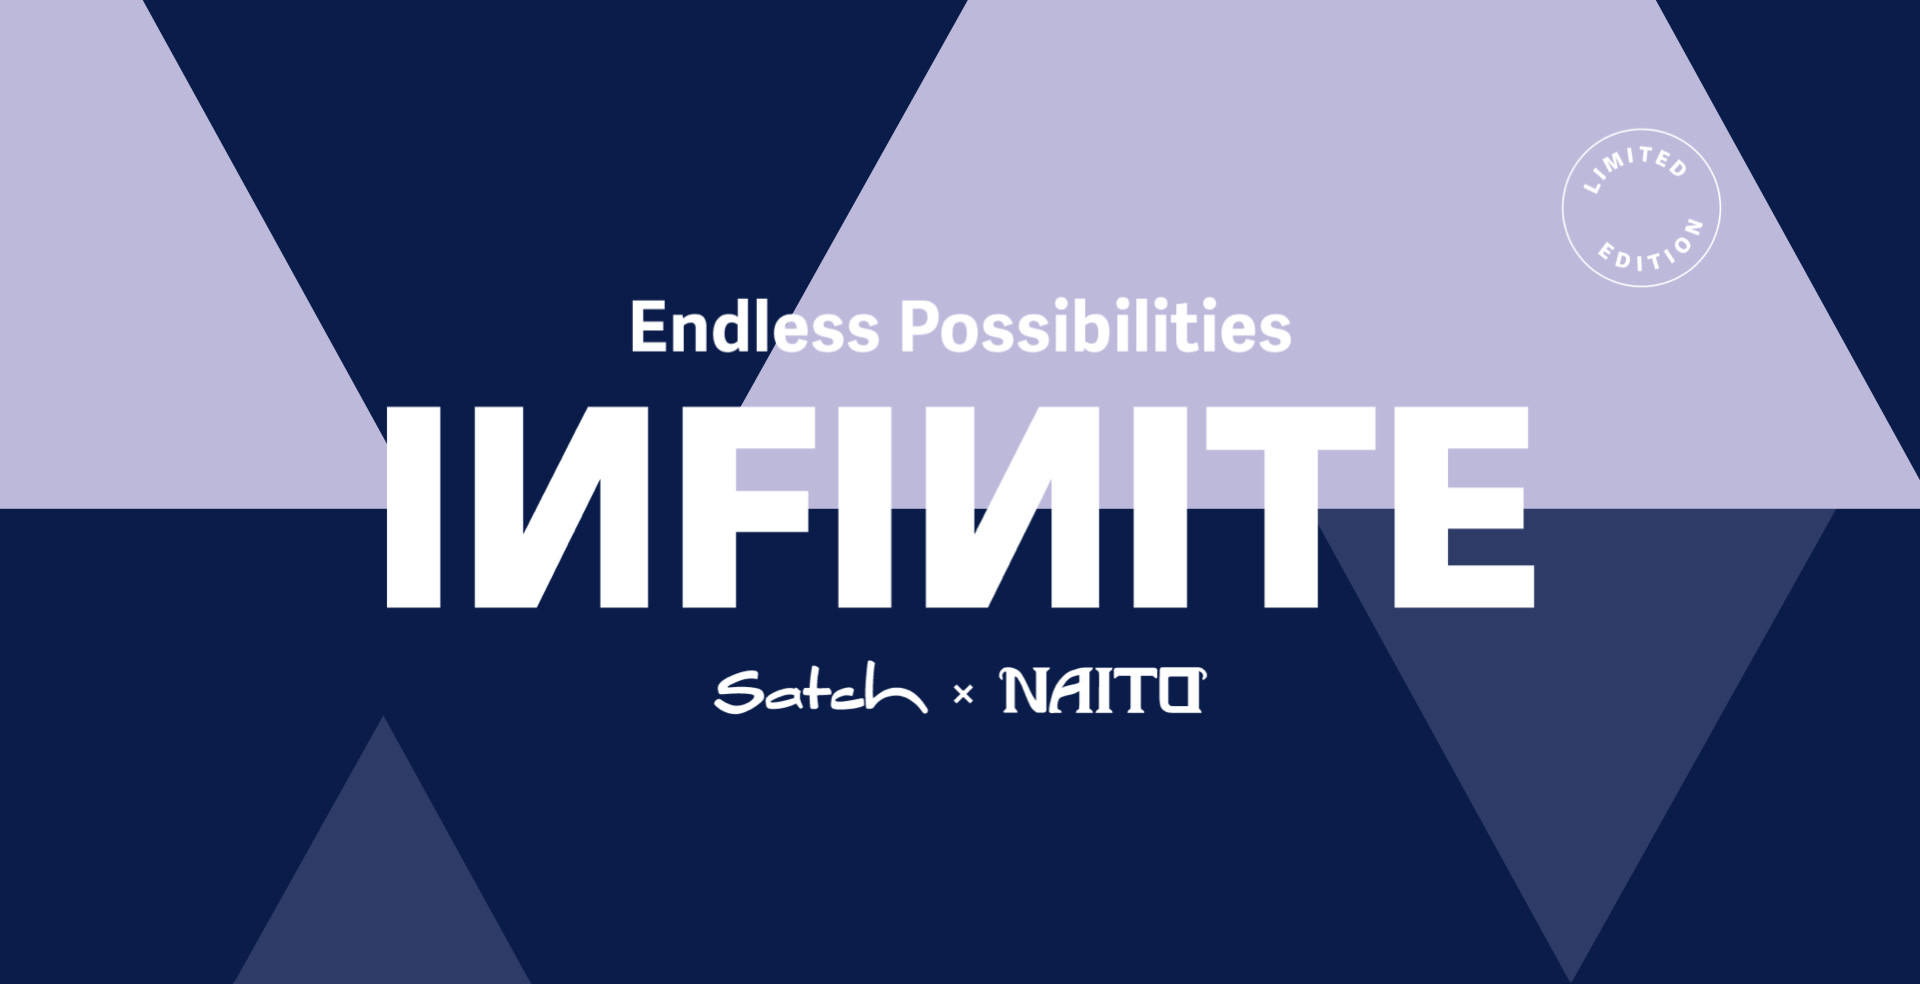 satch-hero-special-edition-infinite-endless-possibilities-xs